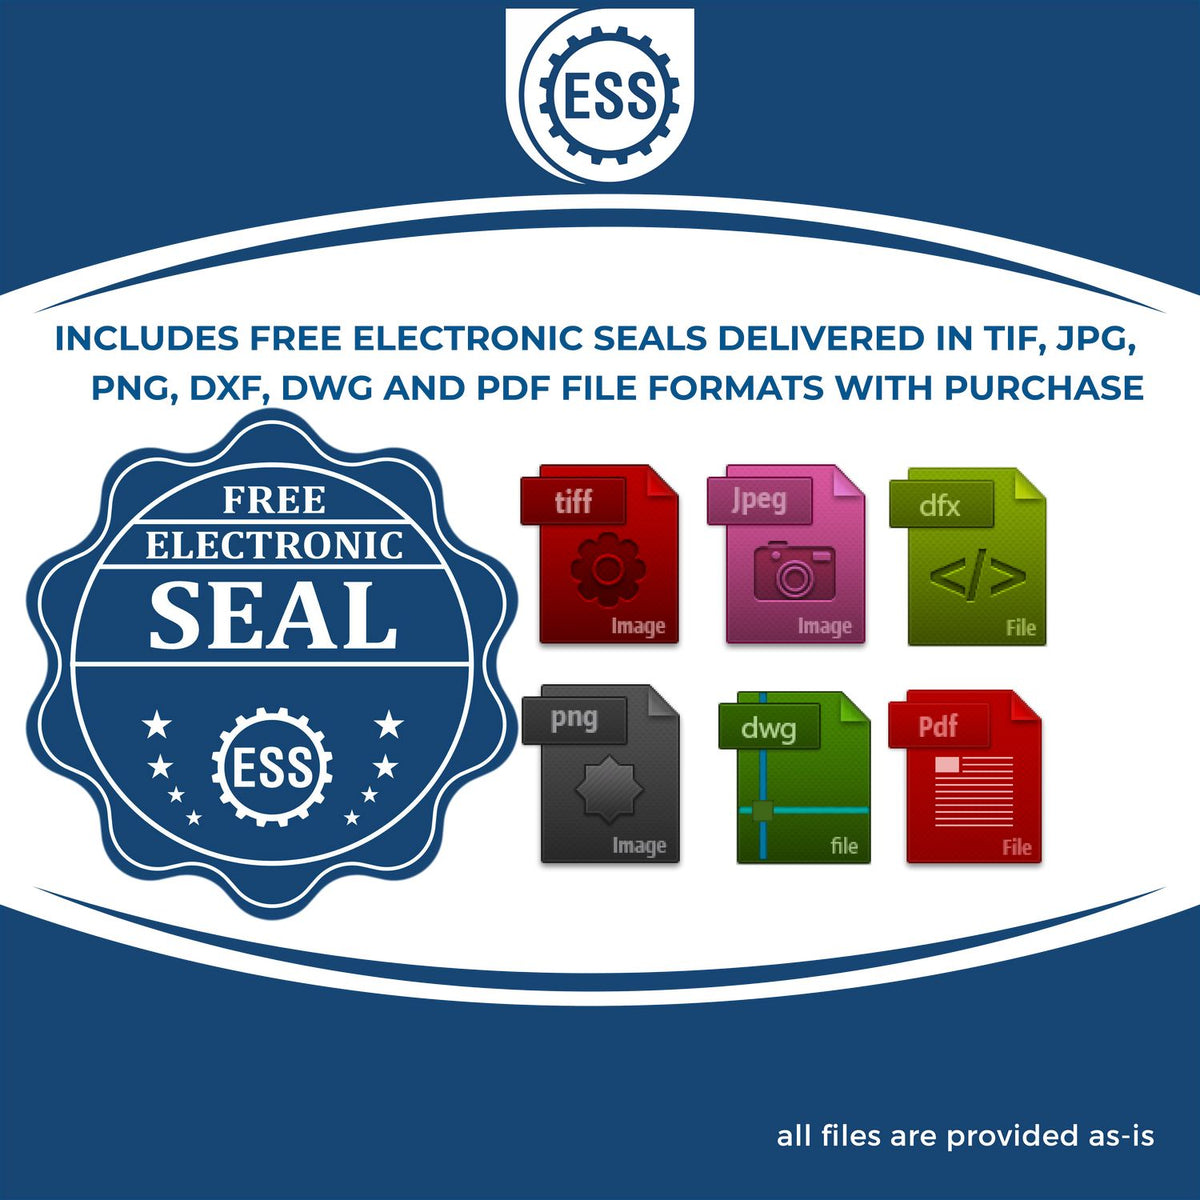 An infographic for the free electronic seal for the Self-Inking Tennessee PE Stamp illustrating the different file type icons such as DXF, DWG, TIF, JPG and PNG.